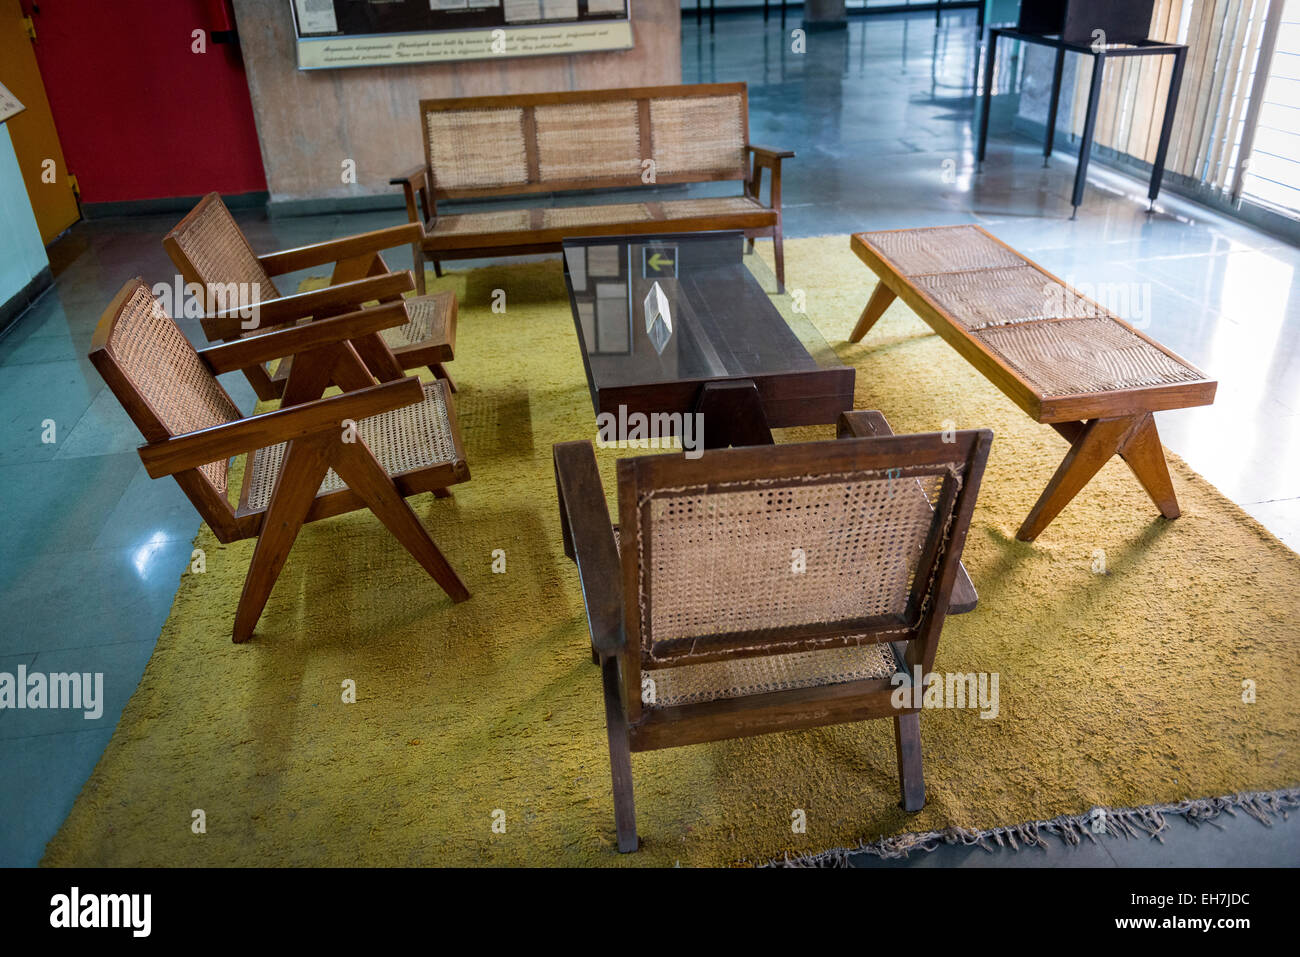 Original 1950s furniture in The Museum of Architecture in Chandigarh, India Stock Photo